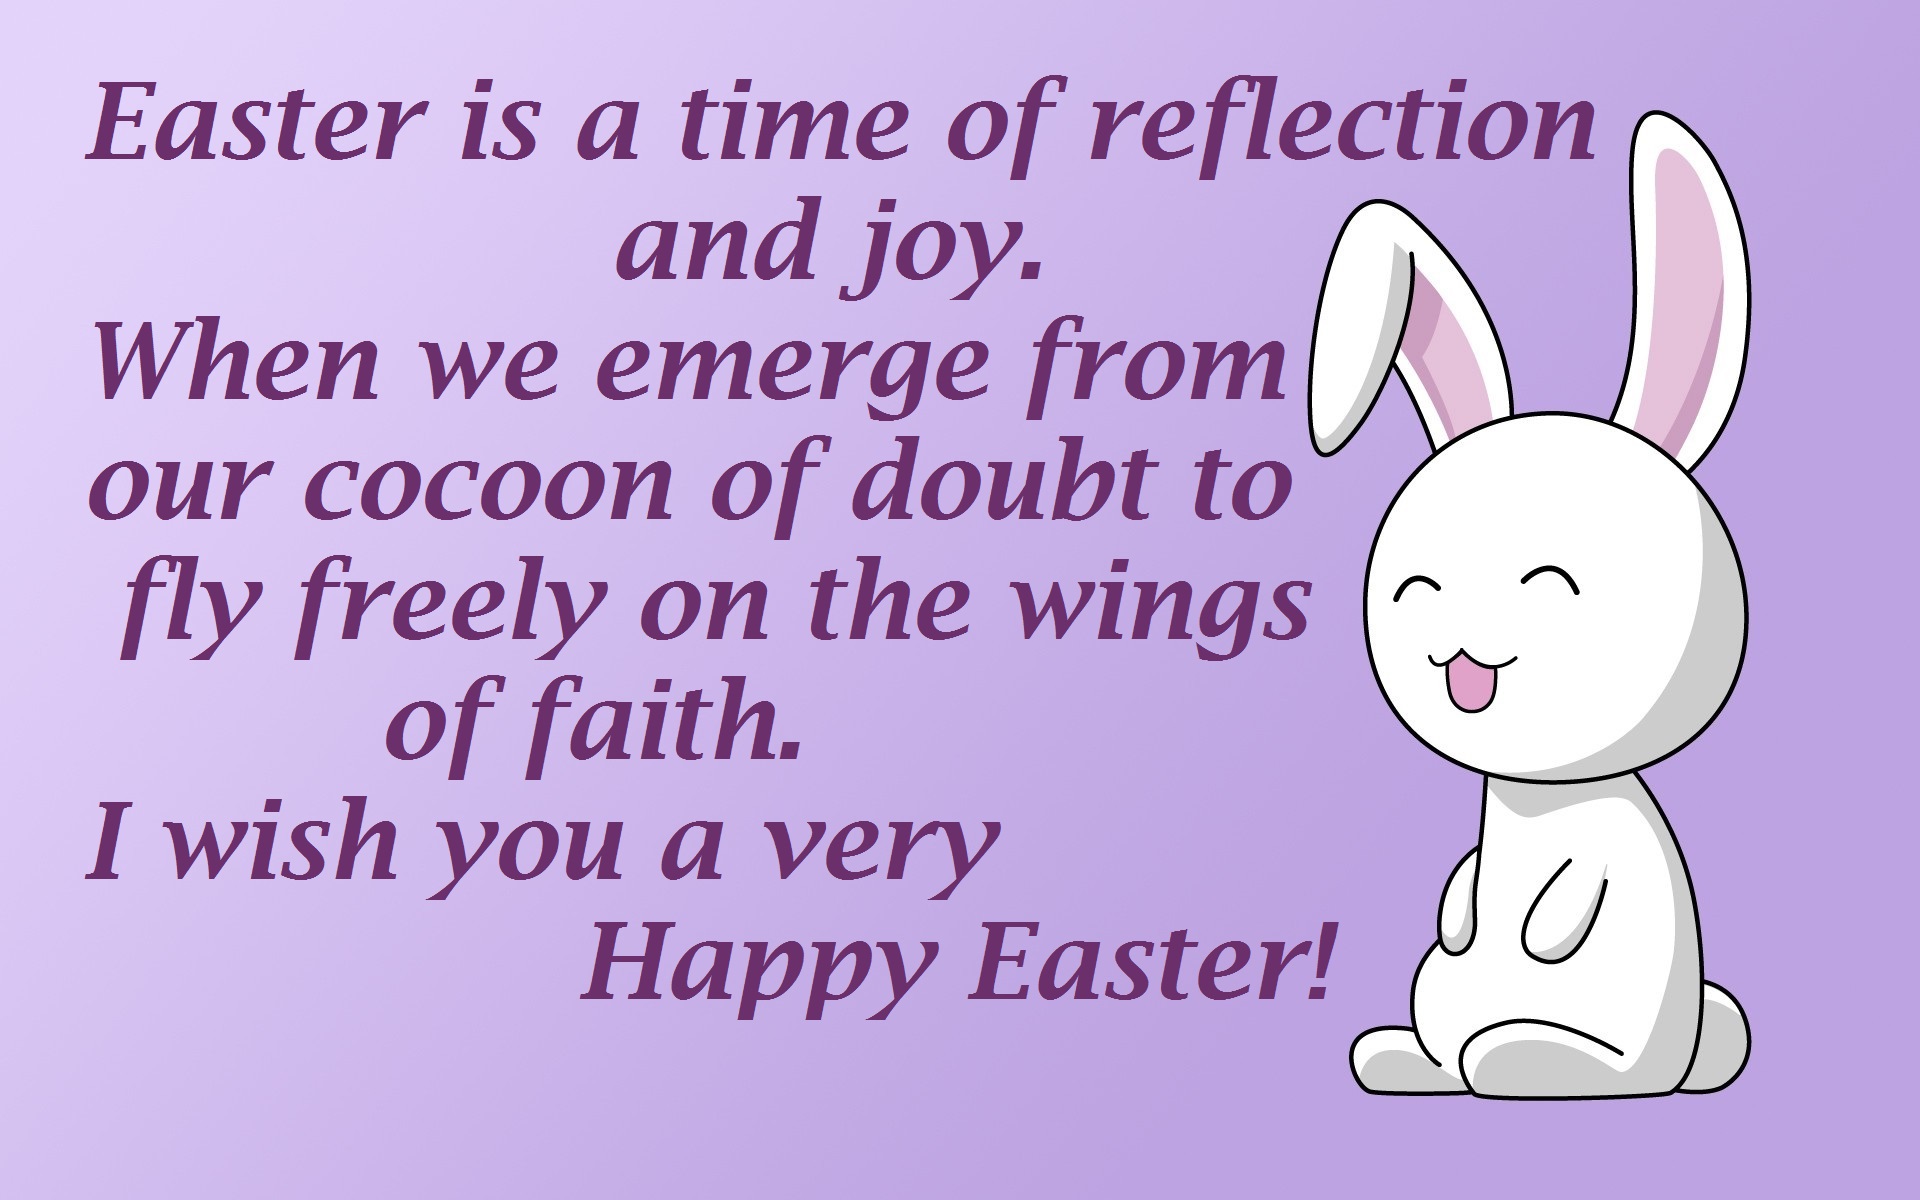 easter wishes image 2017